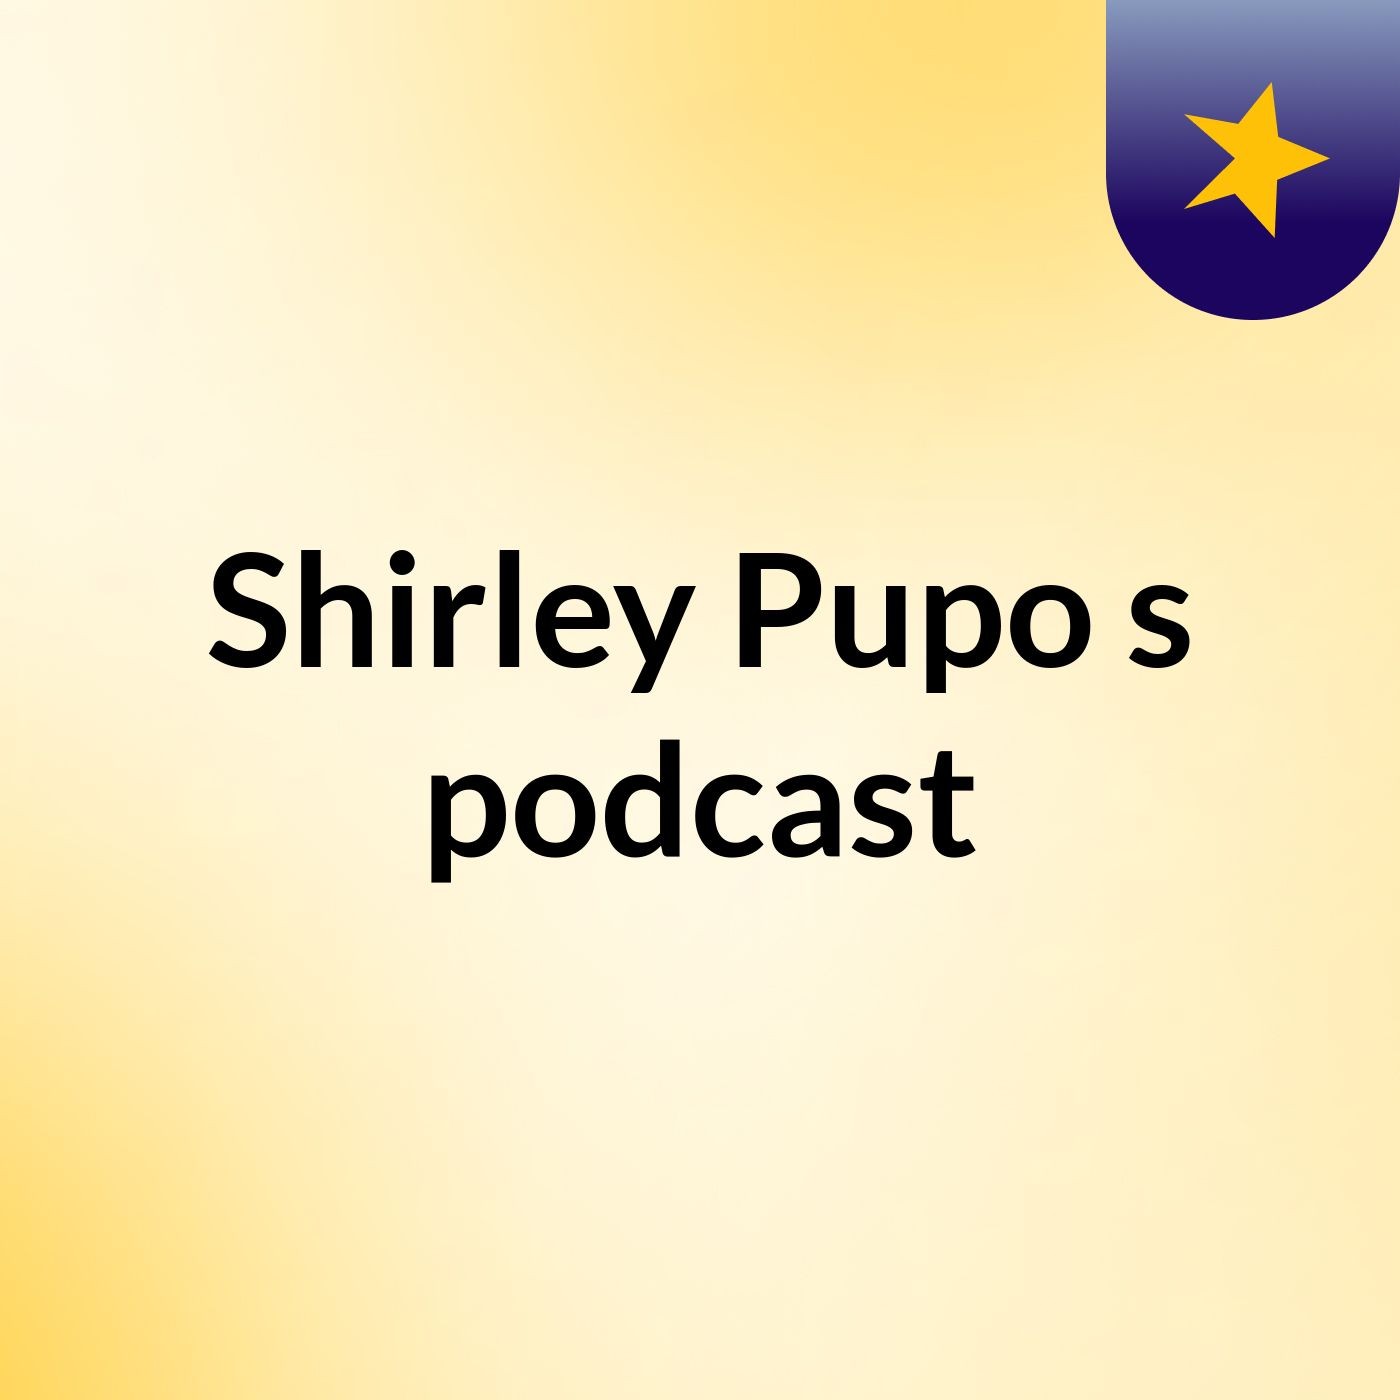 Episode 2 - Shirley Pupo's podcast